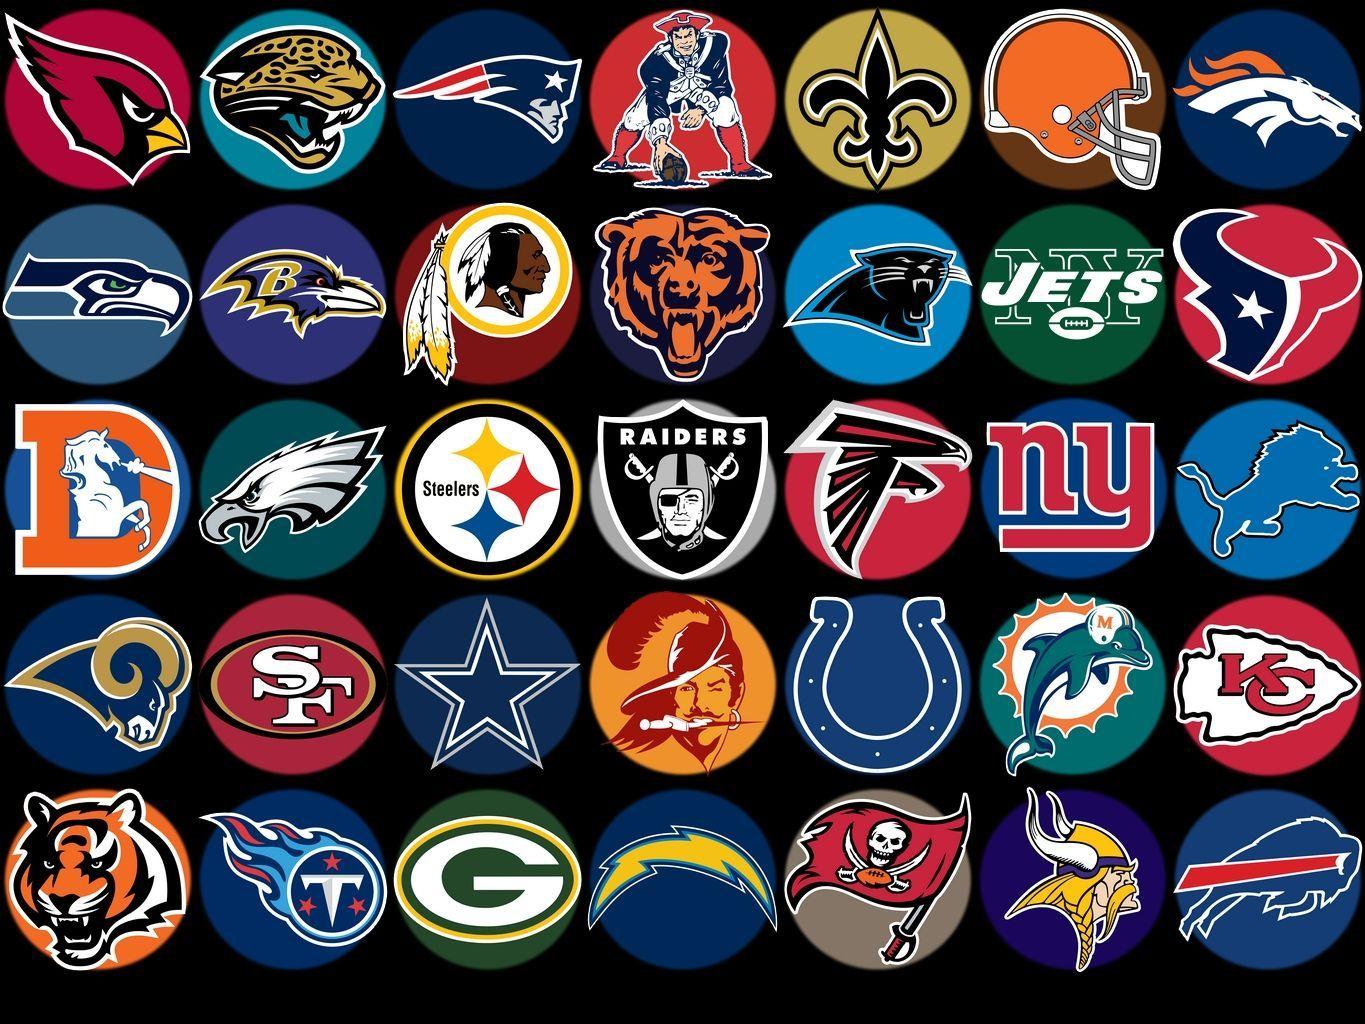 NFL American Football Logo - 8 pubs to watch the NFL in Dublin. | Publin